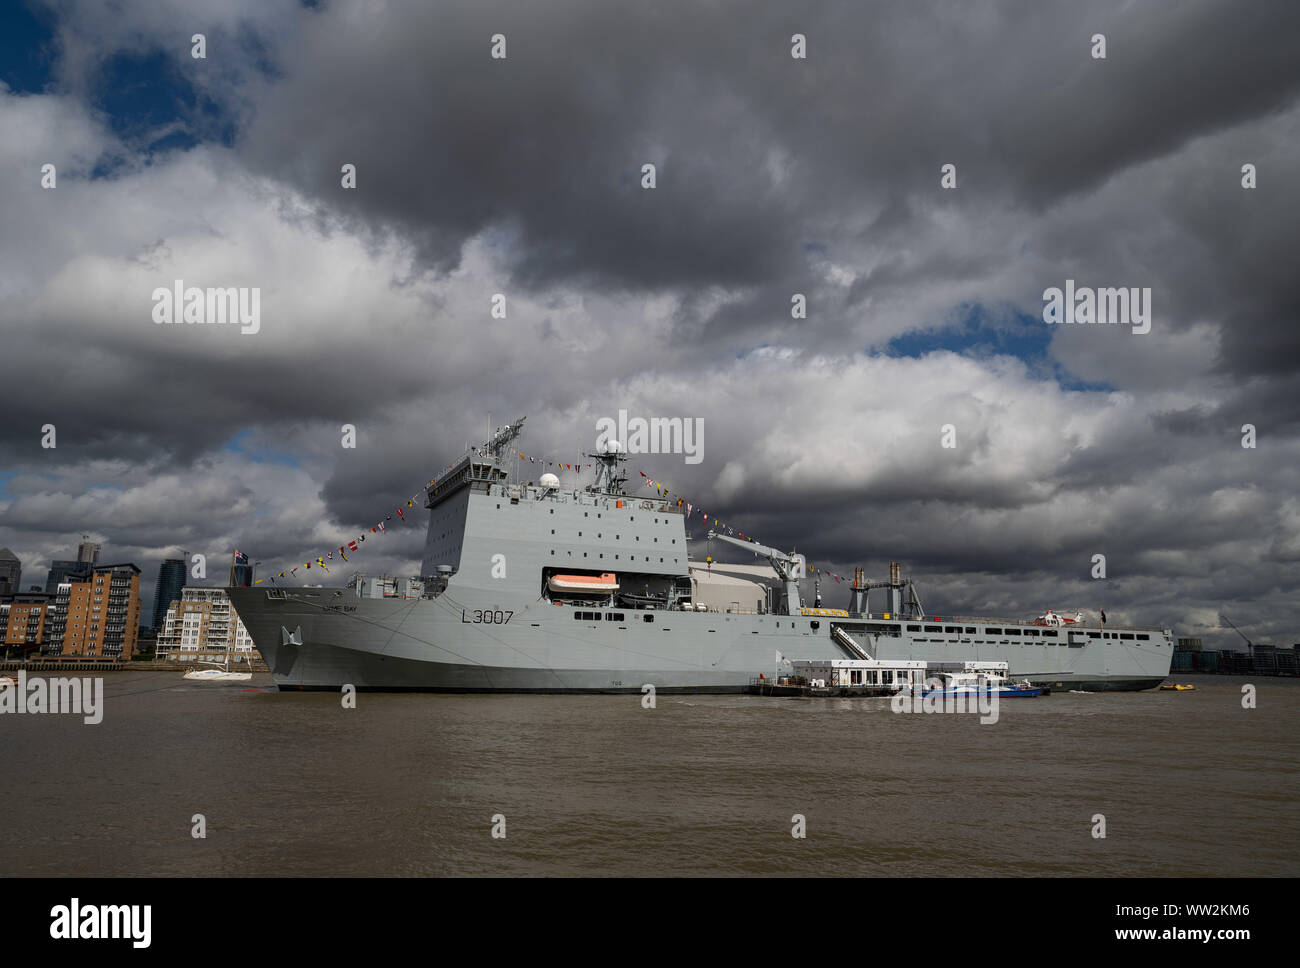 London, UK. 12th September, 2019. RFA Lyme Bay (L3007) moored in the Thames near Greenwich. RFA Lyme Bay is a Bay-class auxiliary landing ship dock of the British Royal Fleet Auxiliary and capable of delivering a significant fighting force anywhere in the world. Credit: Guy Corbishley/Alamy Live News Stock Photo